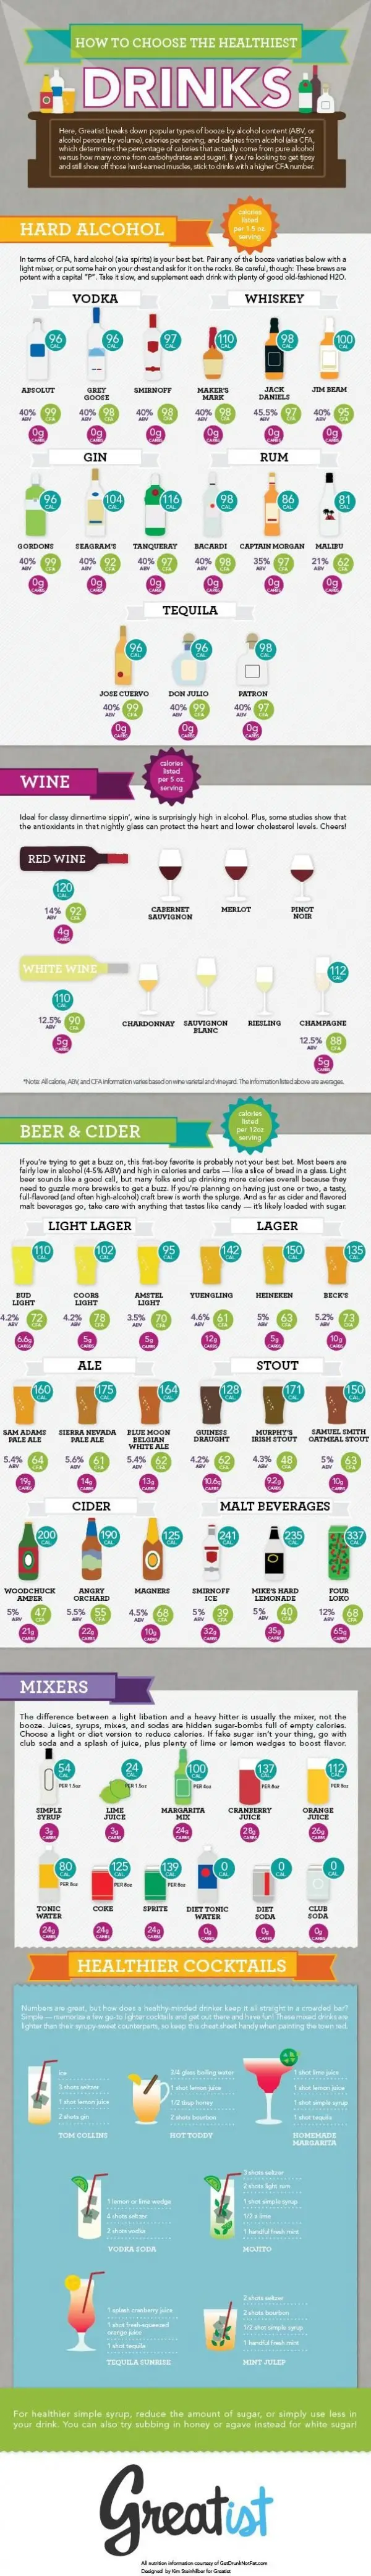 How to Choose the Healthiest Beer, Wine & Cocktails